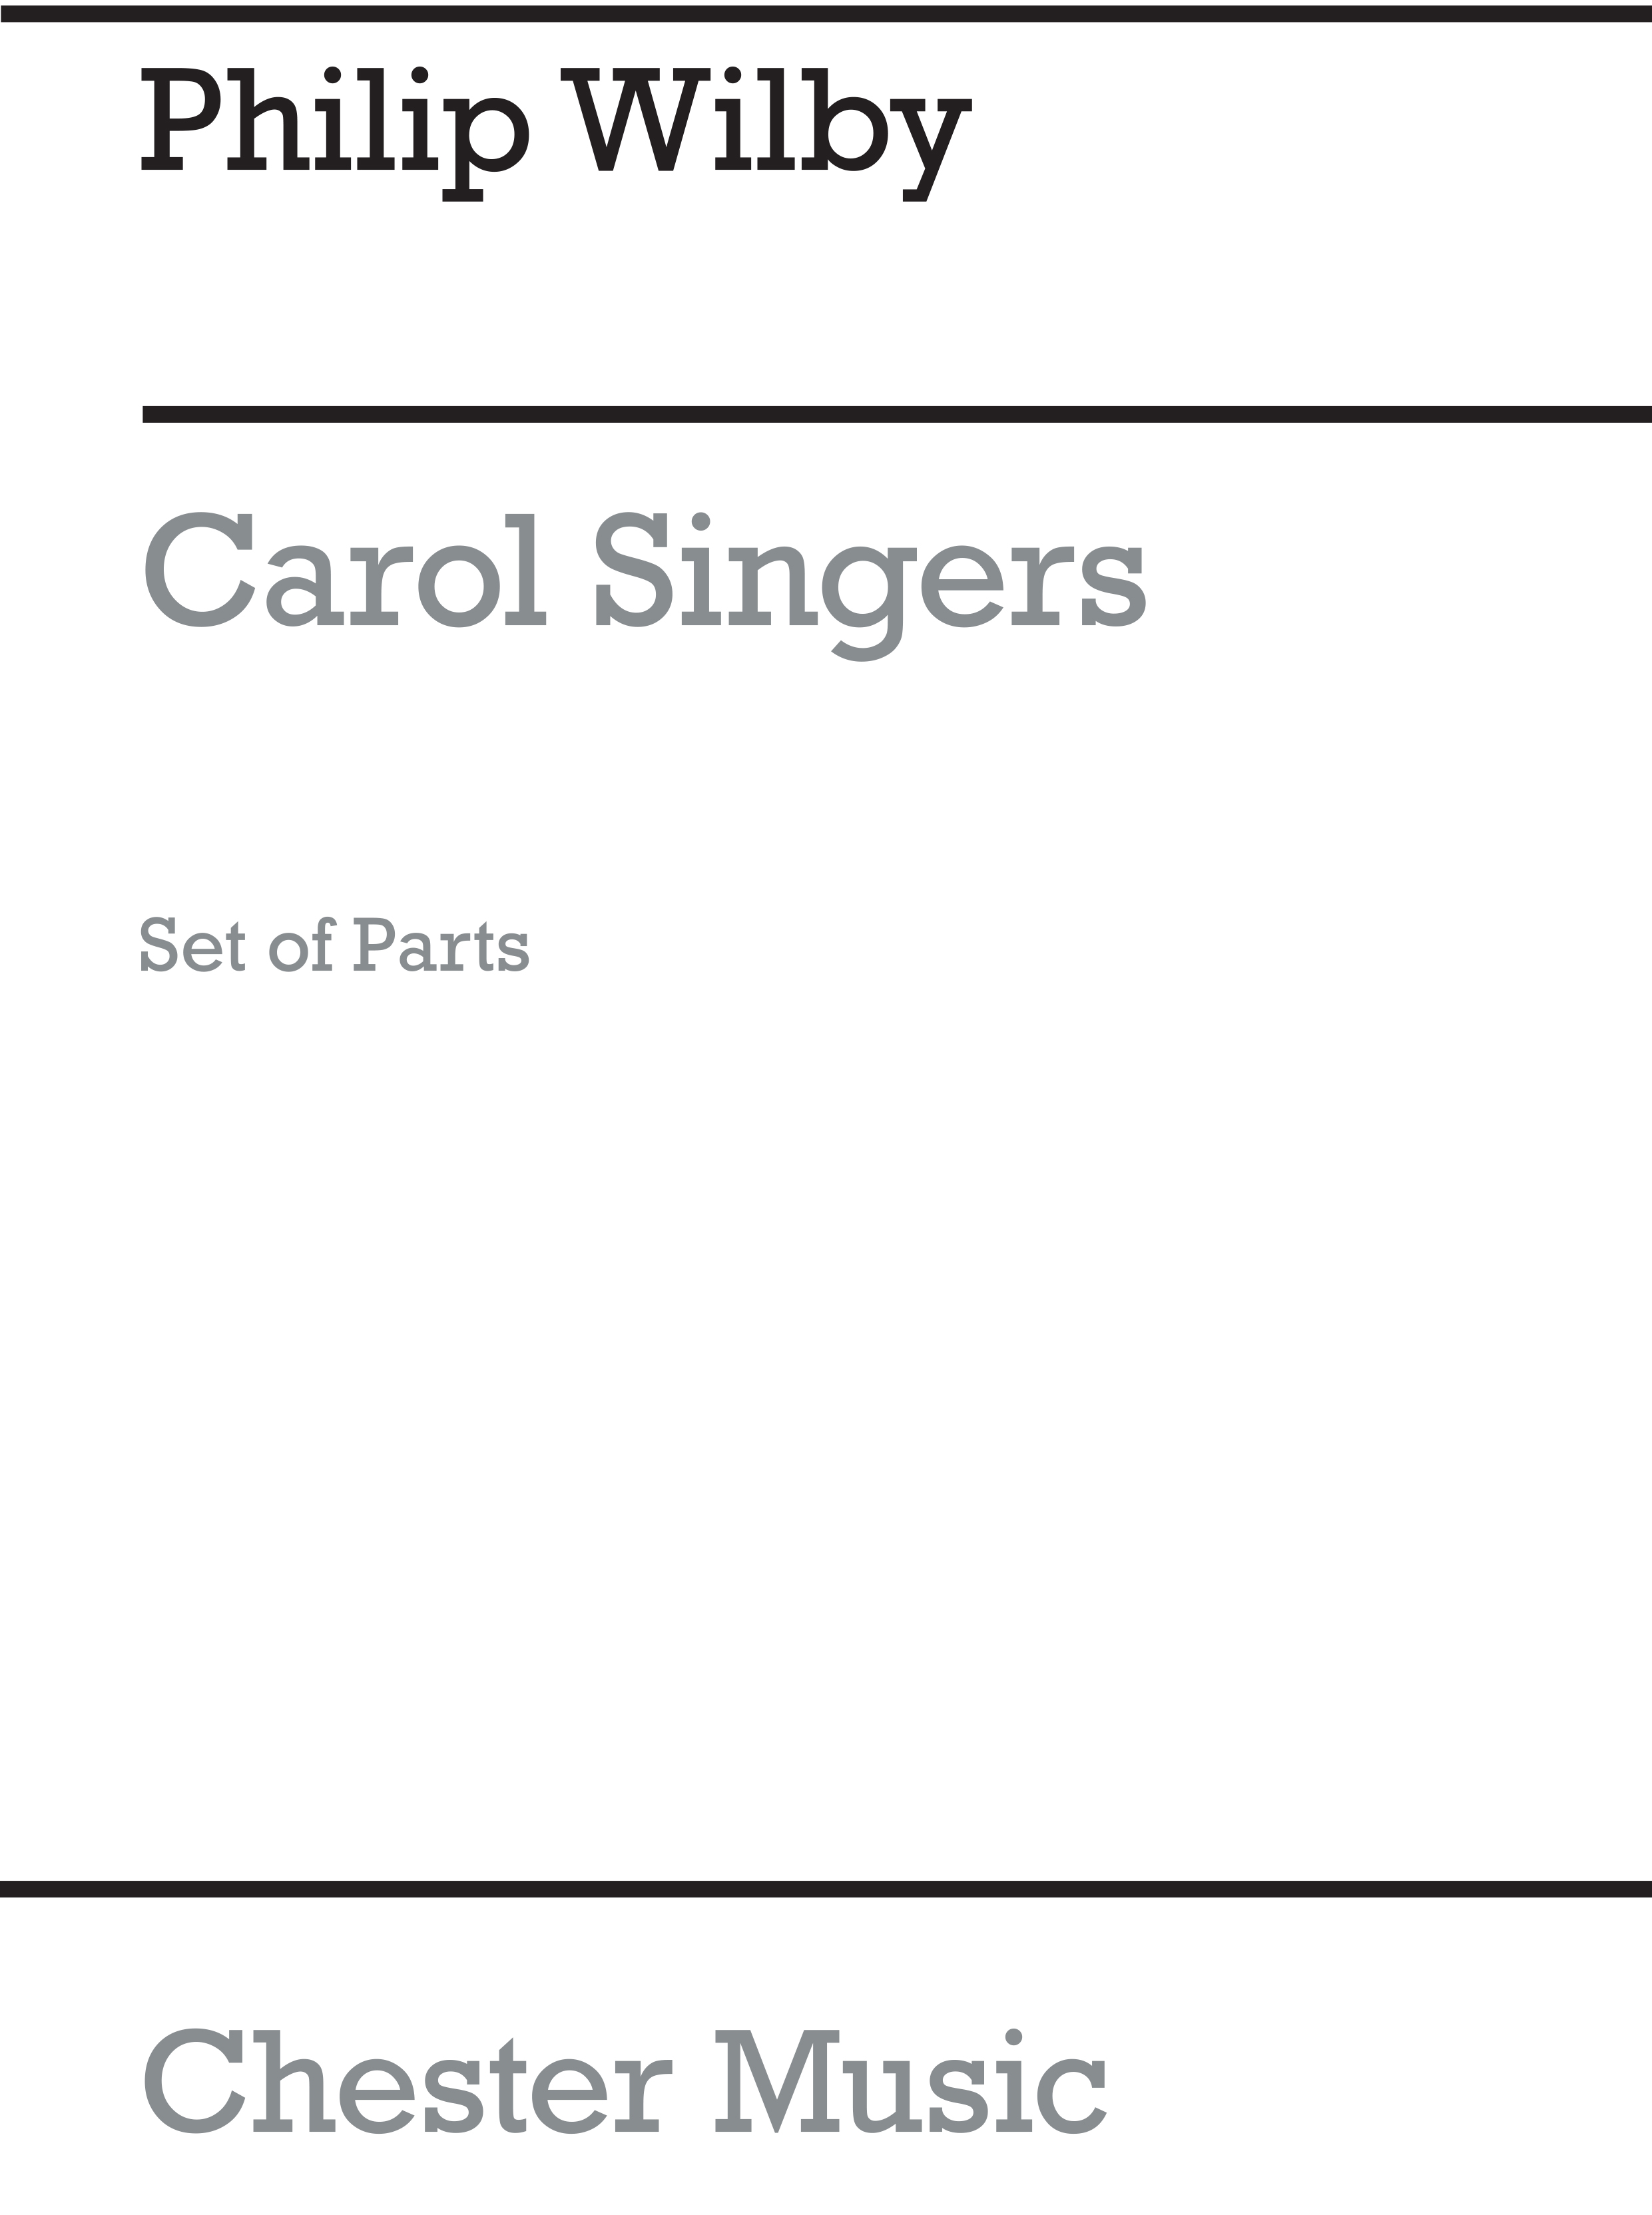 Philip Wilby: Playstrings Moderately Easy No. 16 Carol Singers: Orchestra: